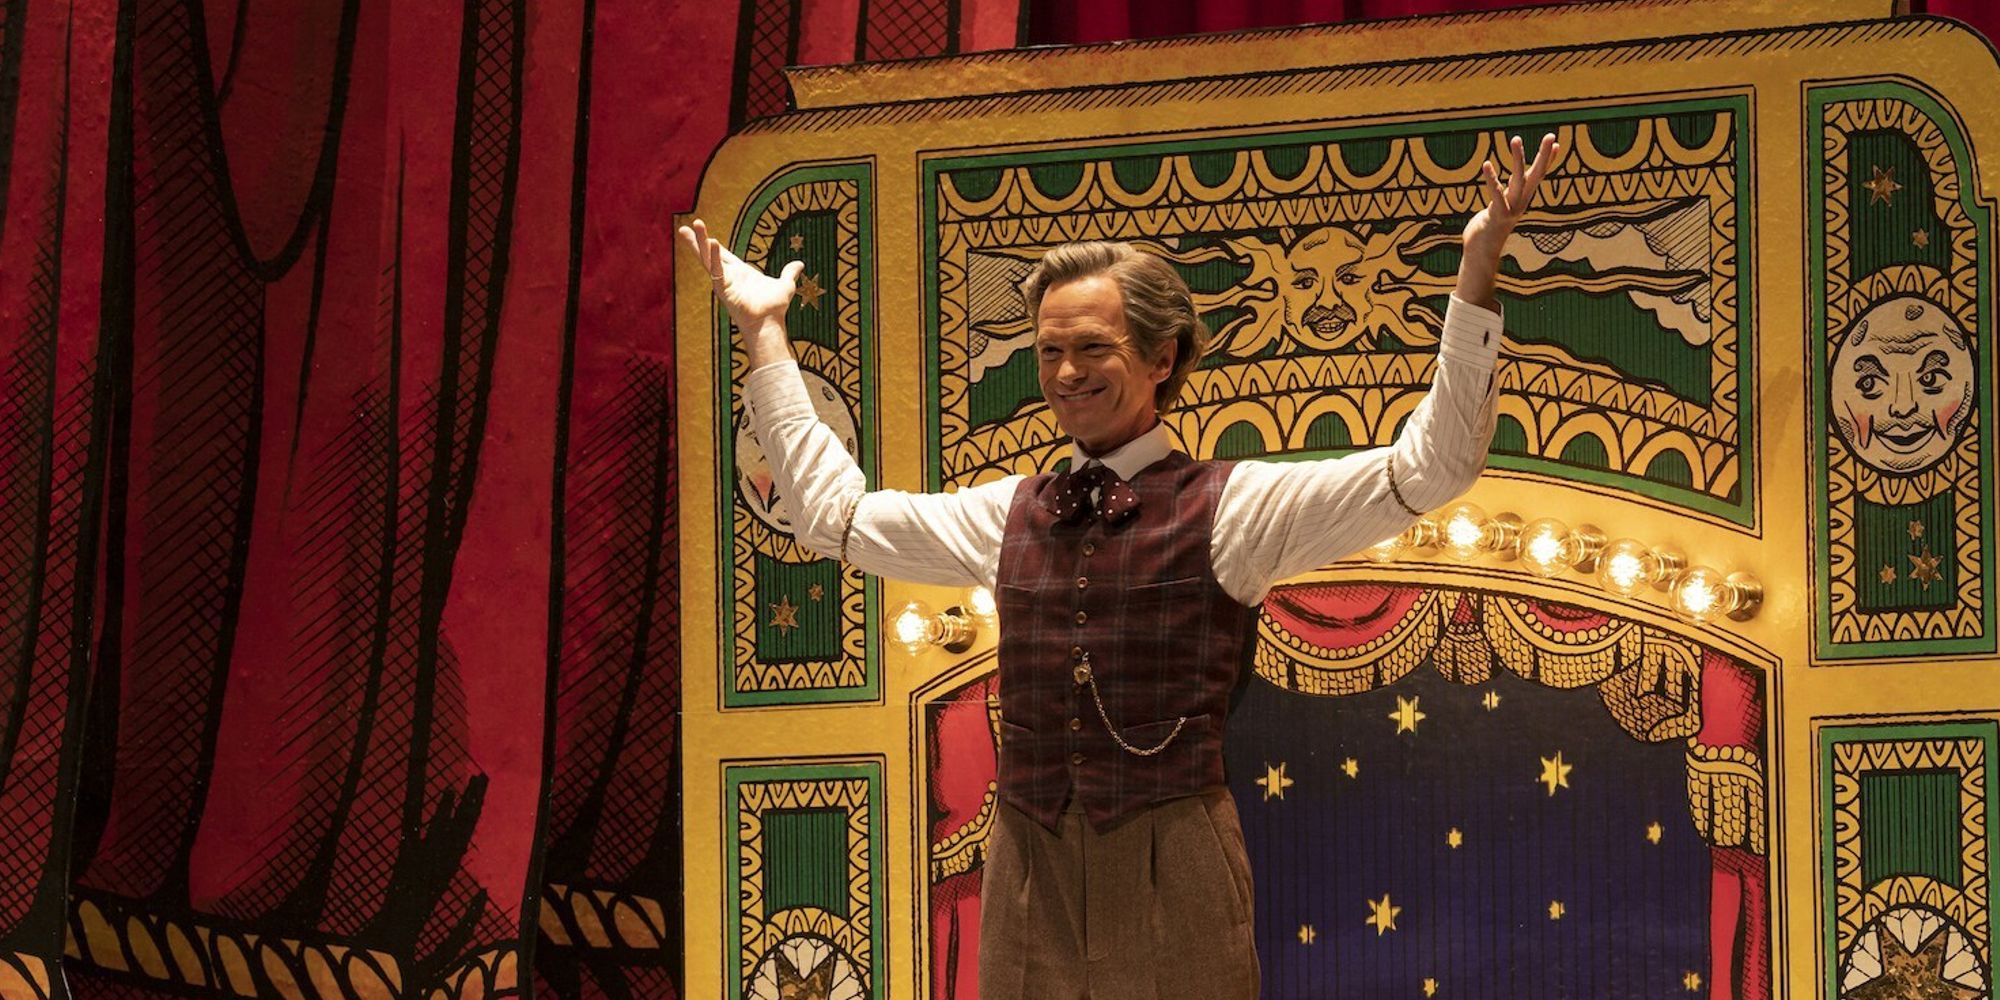 Neil Patrick Harris as The Toymaker on stage in Doctor Who